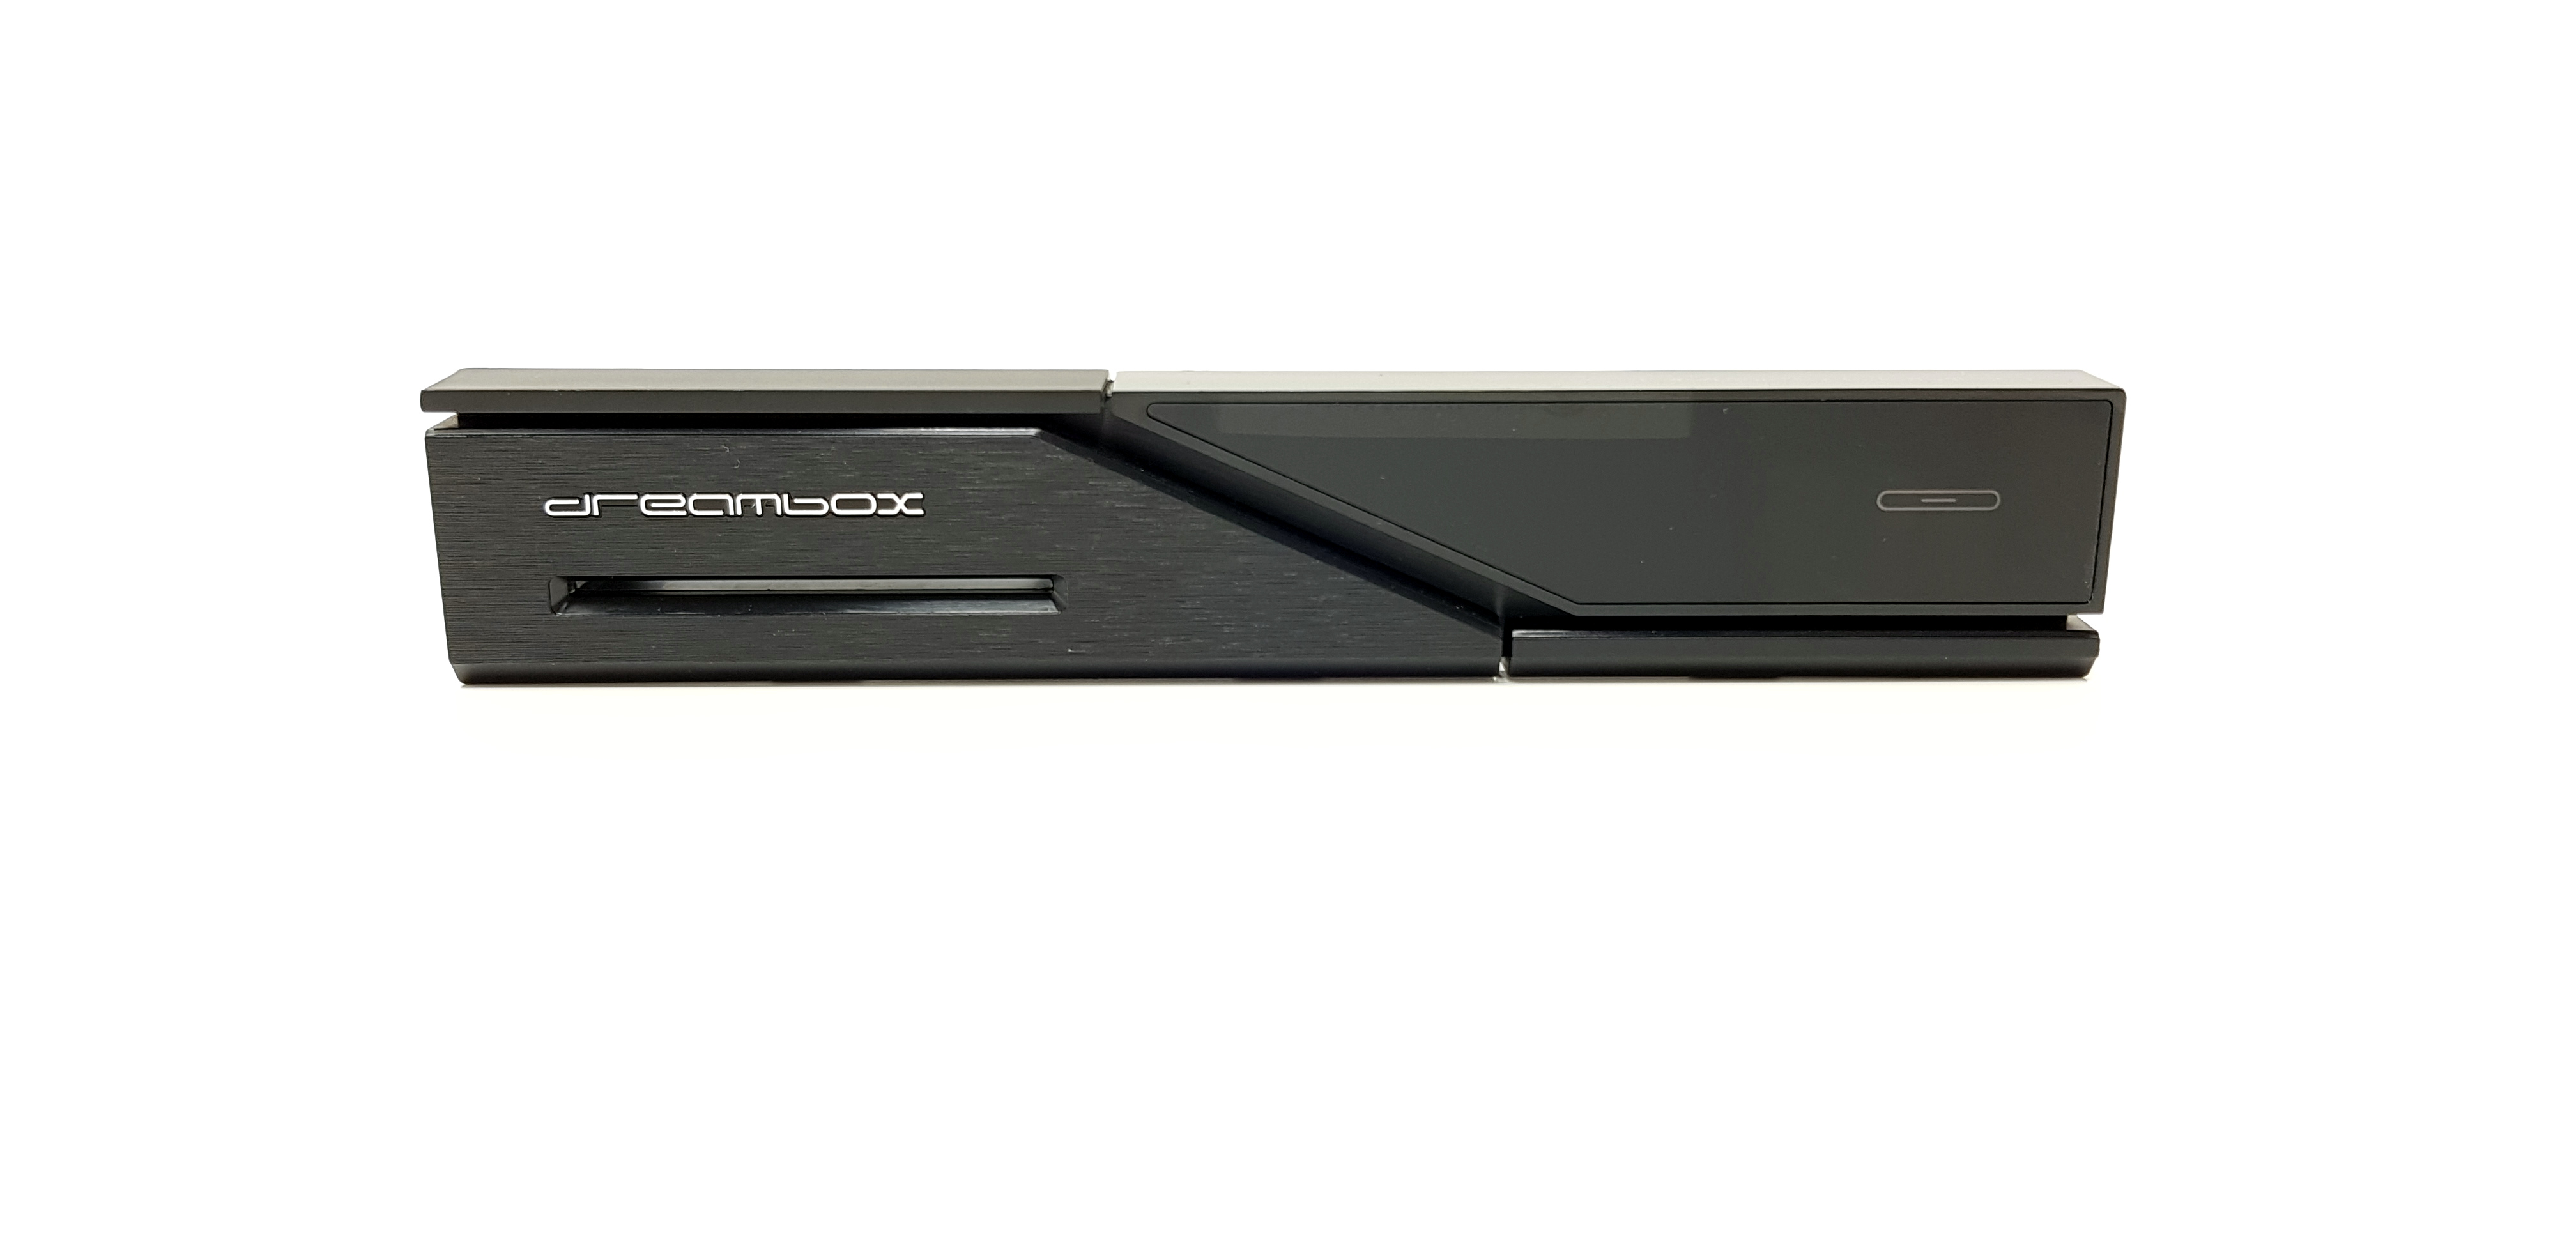 Dreambox DM525 HD Combo Frontblende